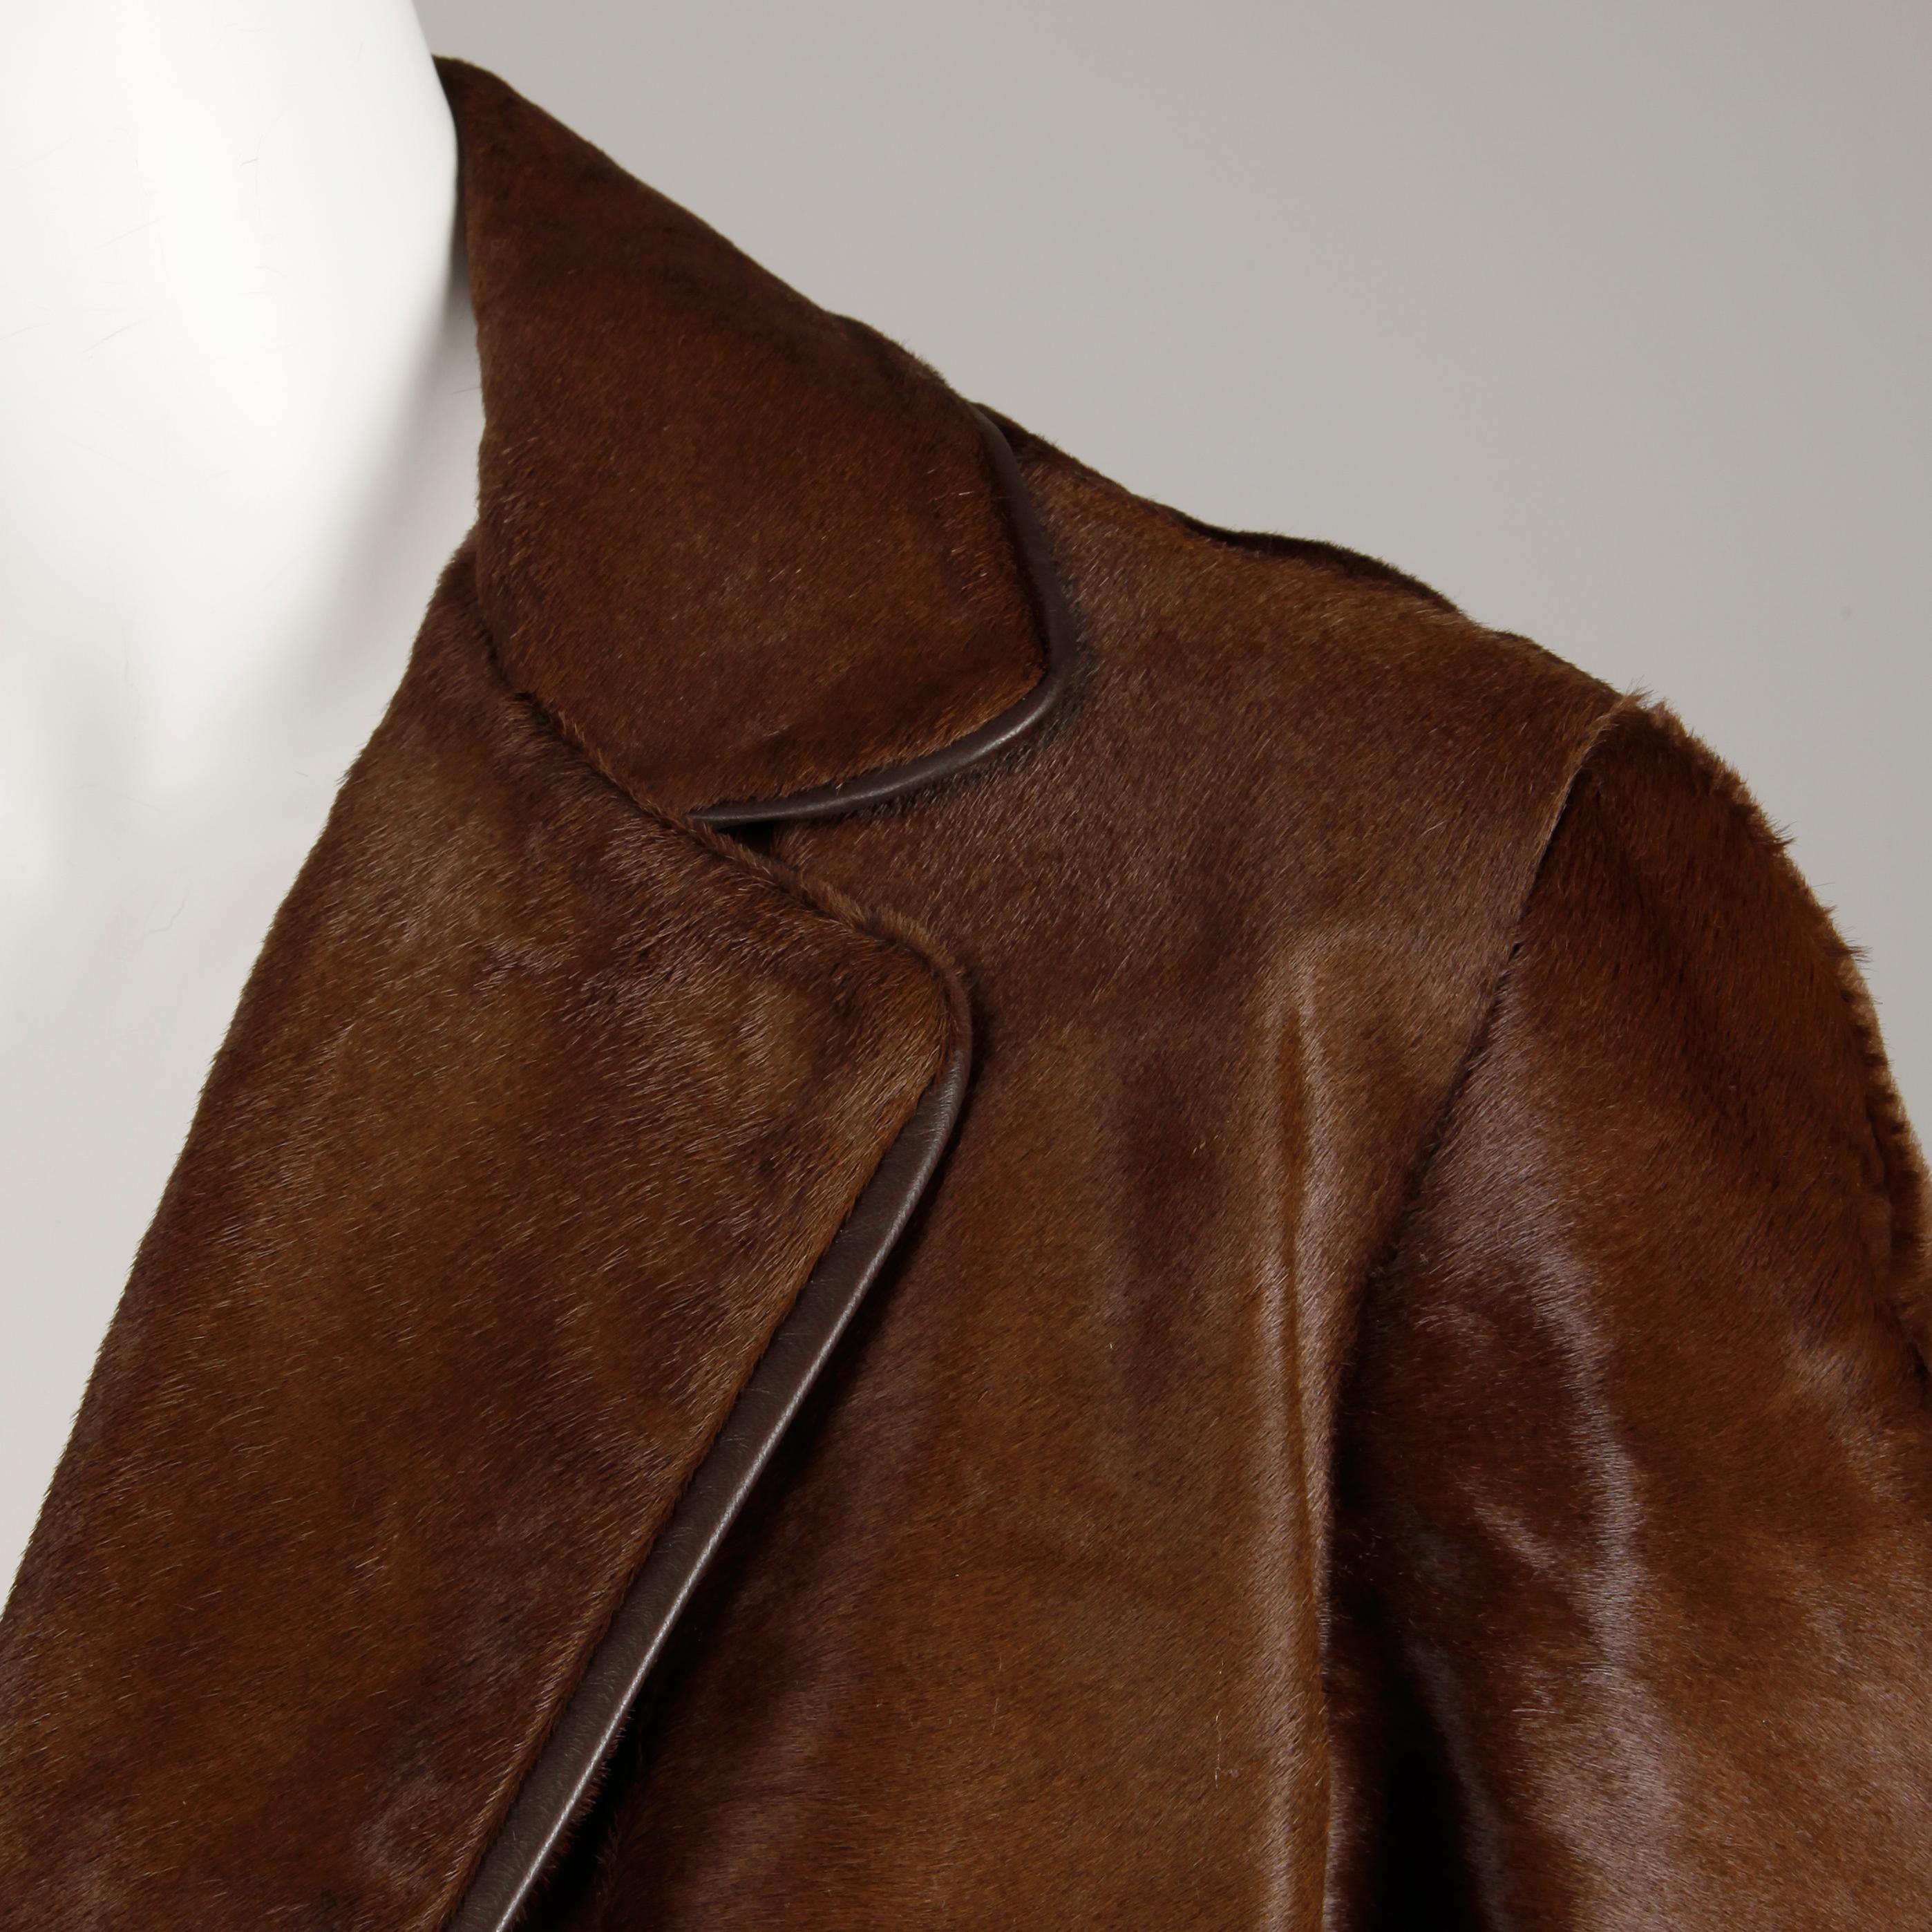 Stunning vintage brown fur coat from the 1960s in incredible condition (rare to find one of these without balding). Drop waist and pleated detail in the bottom back. Fully lined with front double button closure. Hidden side pockets. Fits like a